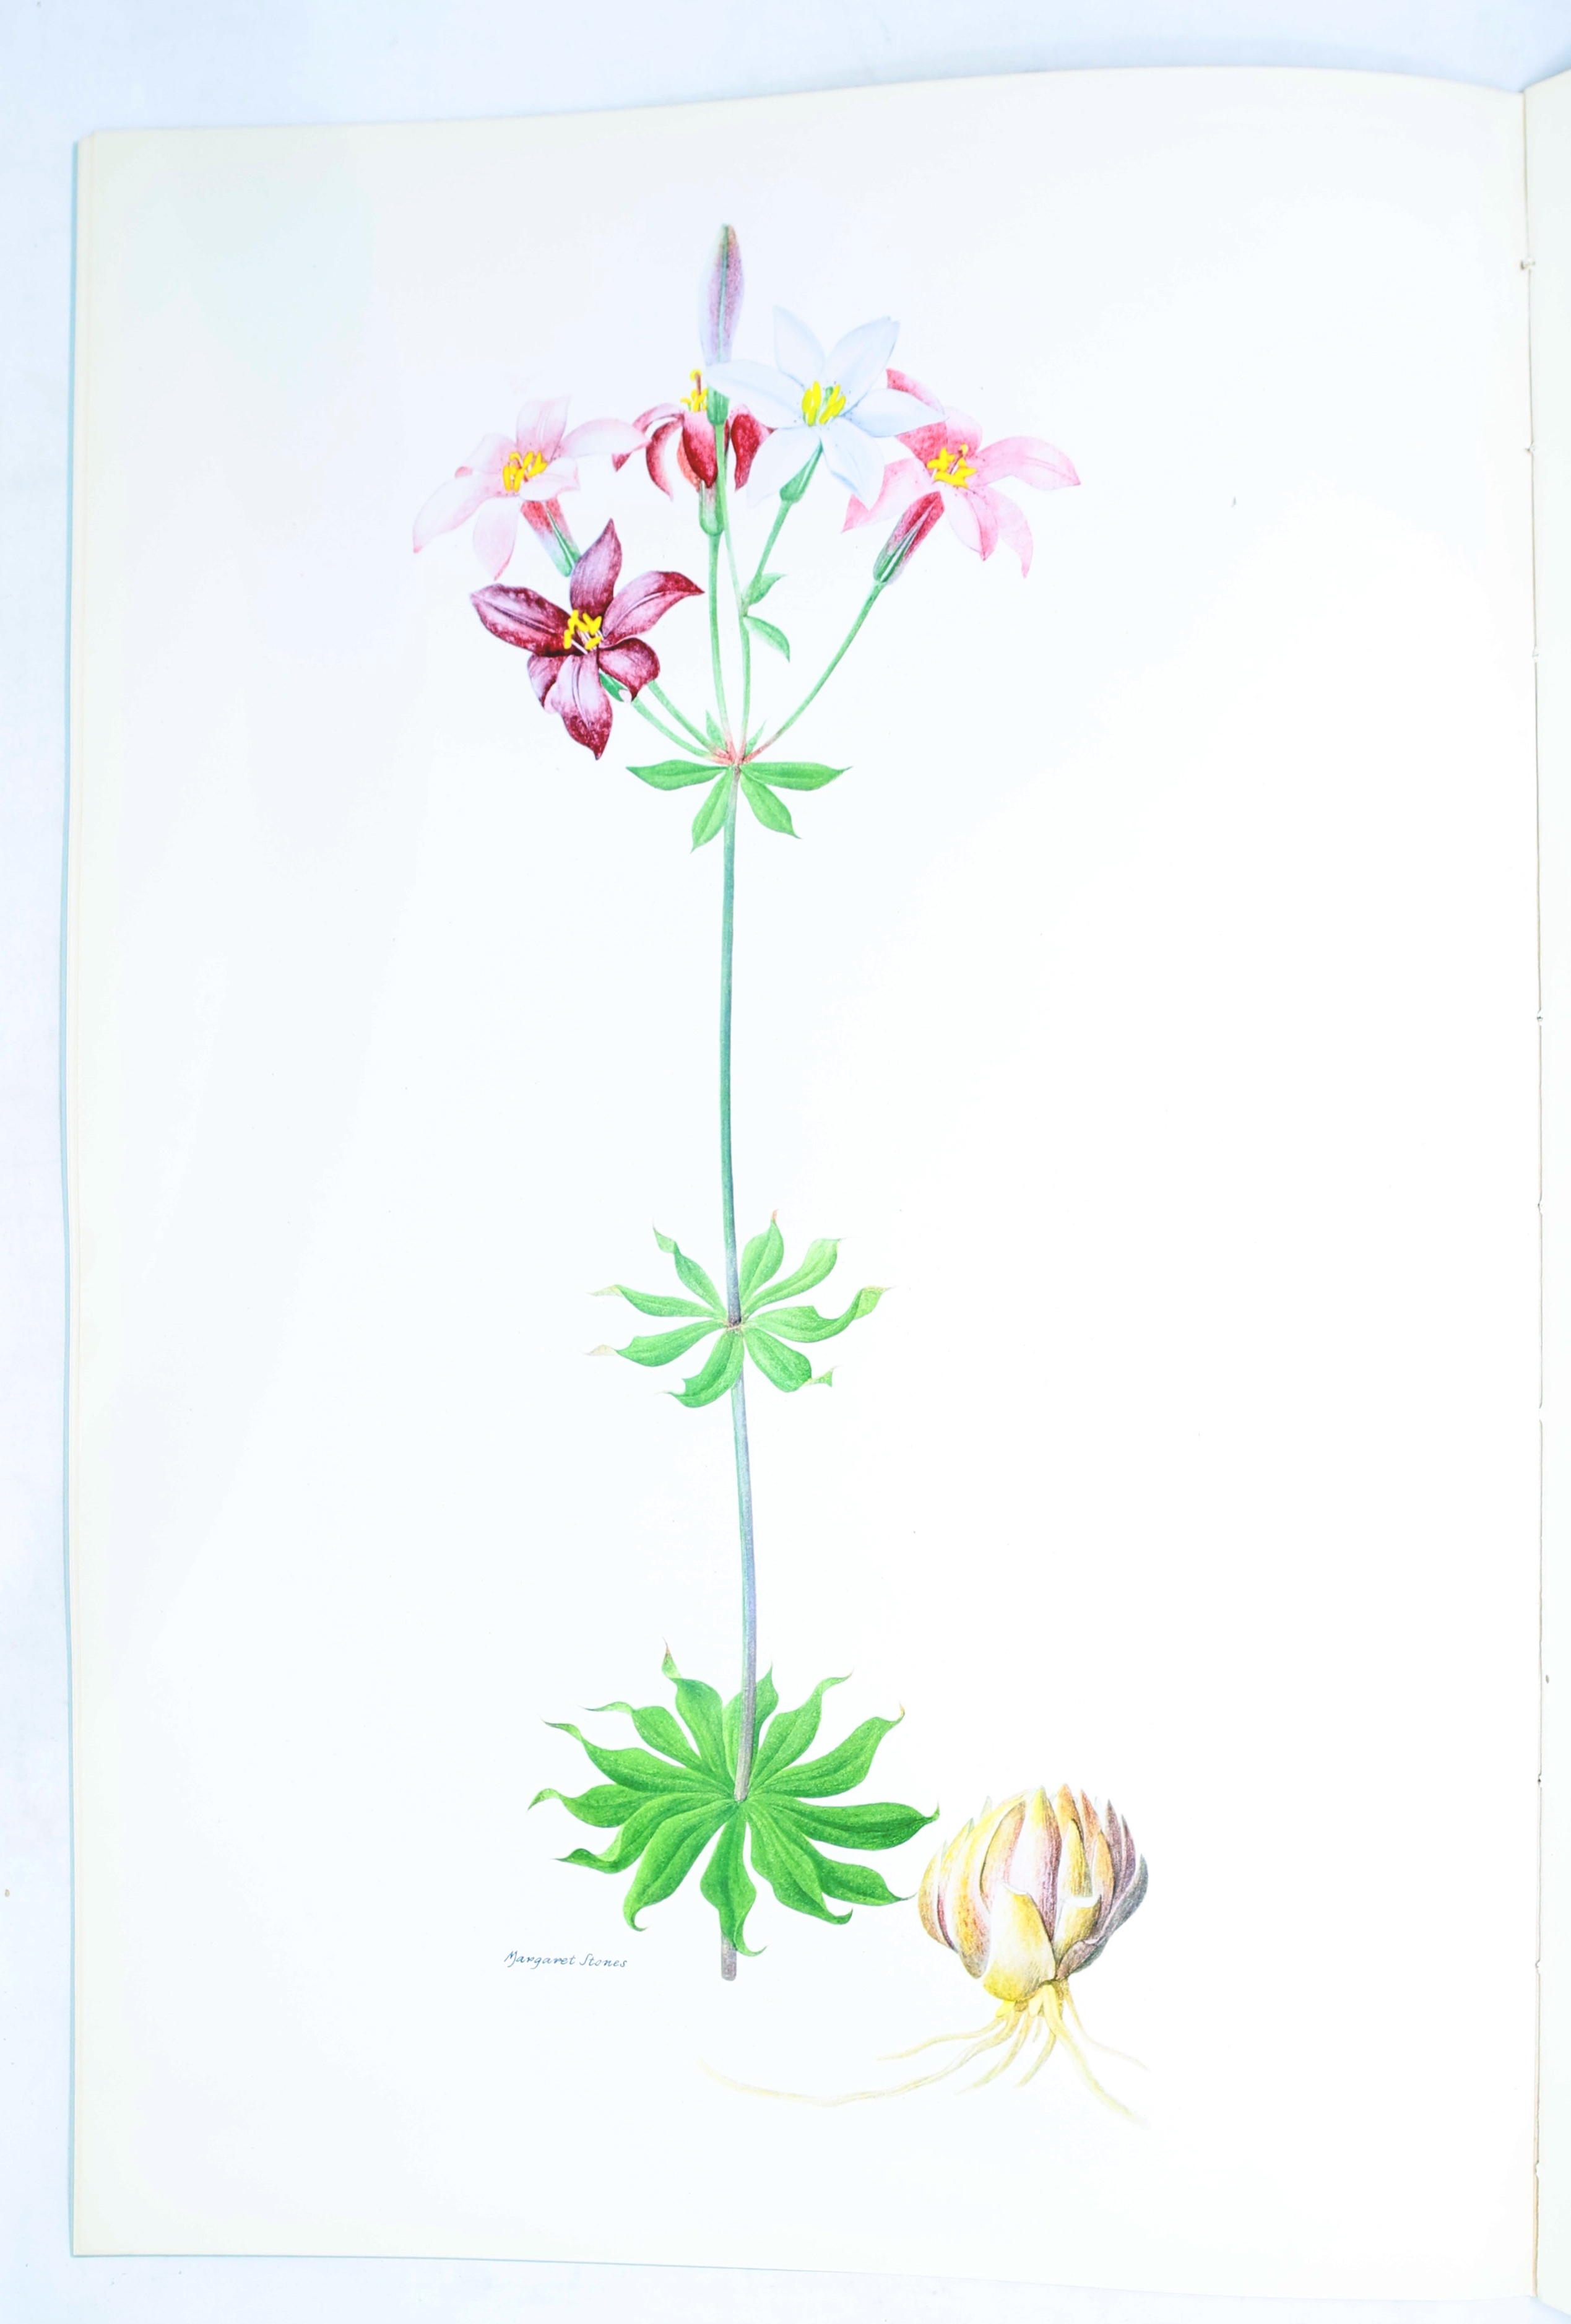 Artwork by Henry John Elwes, Elwes Monograph of the Genus Lilium with Supplement, First Edition, Made of mounted photograph